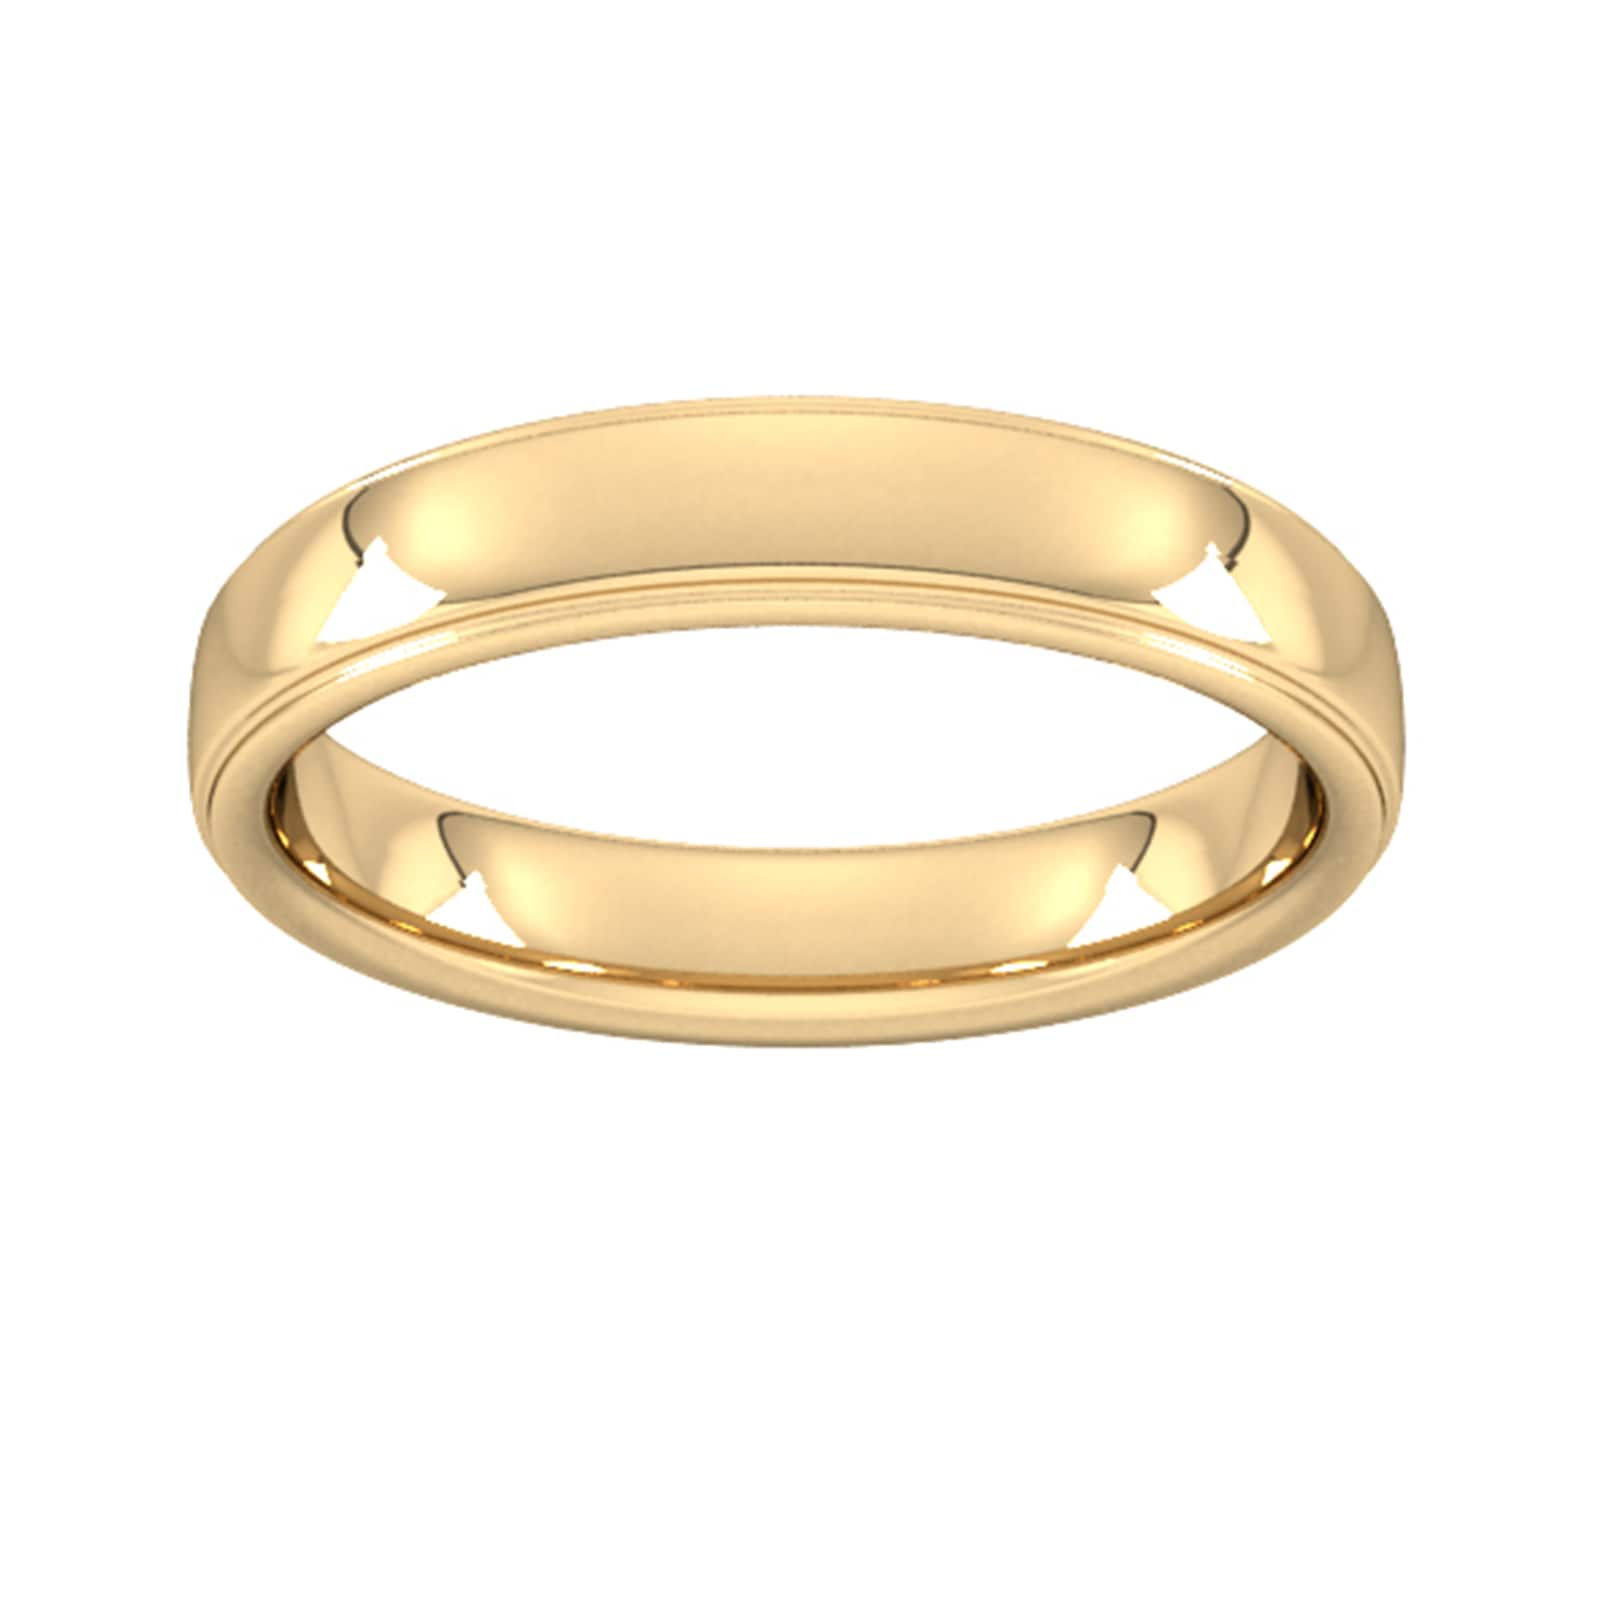 4mm Slight Court Heavy Polished Finish With Grooves Wedding Ring In 9 Carat Yellow Gold - Ring Size O